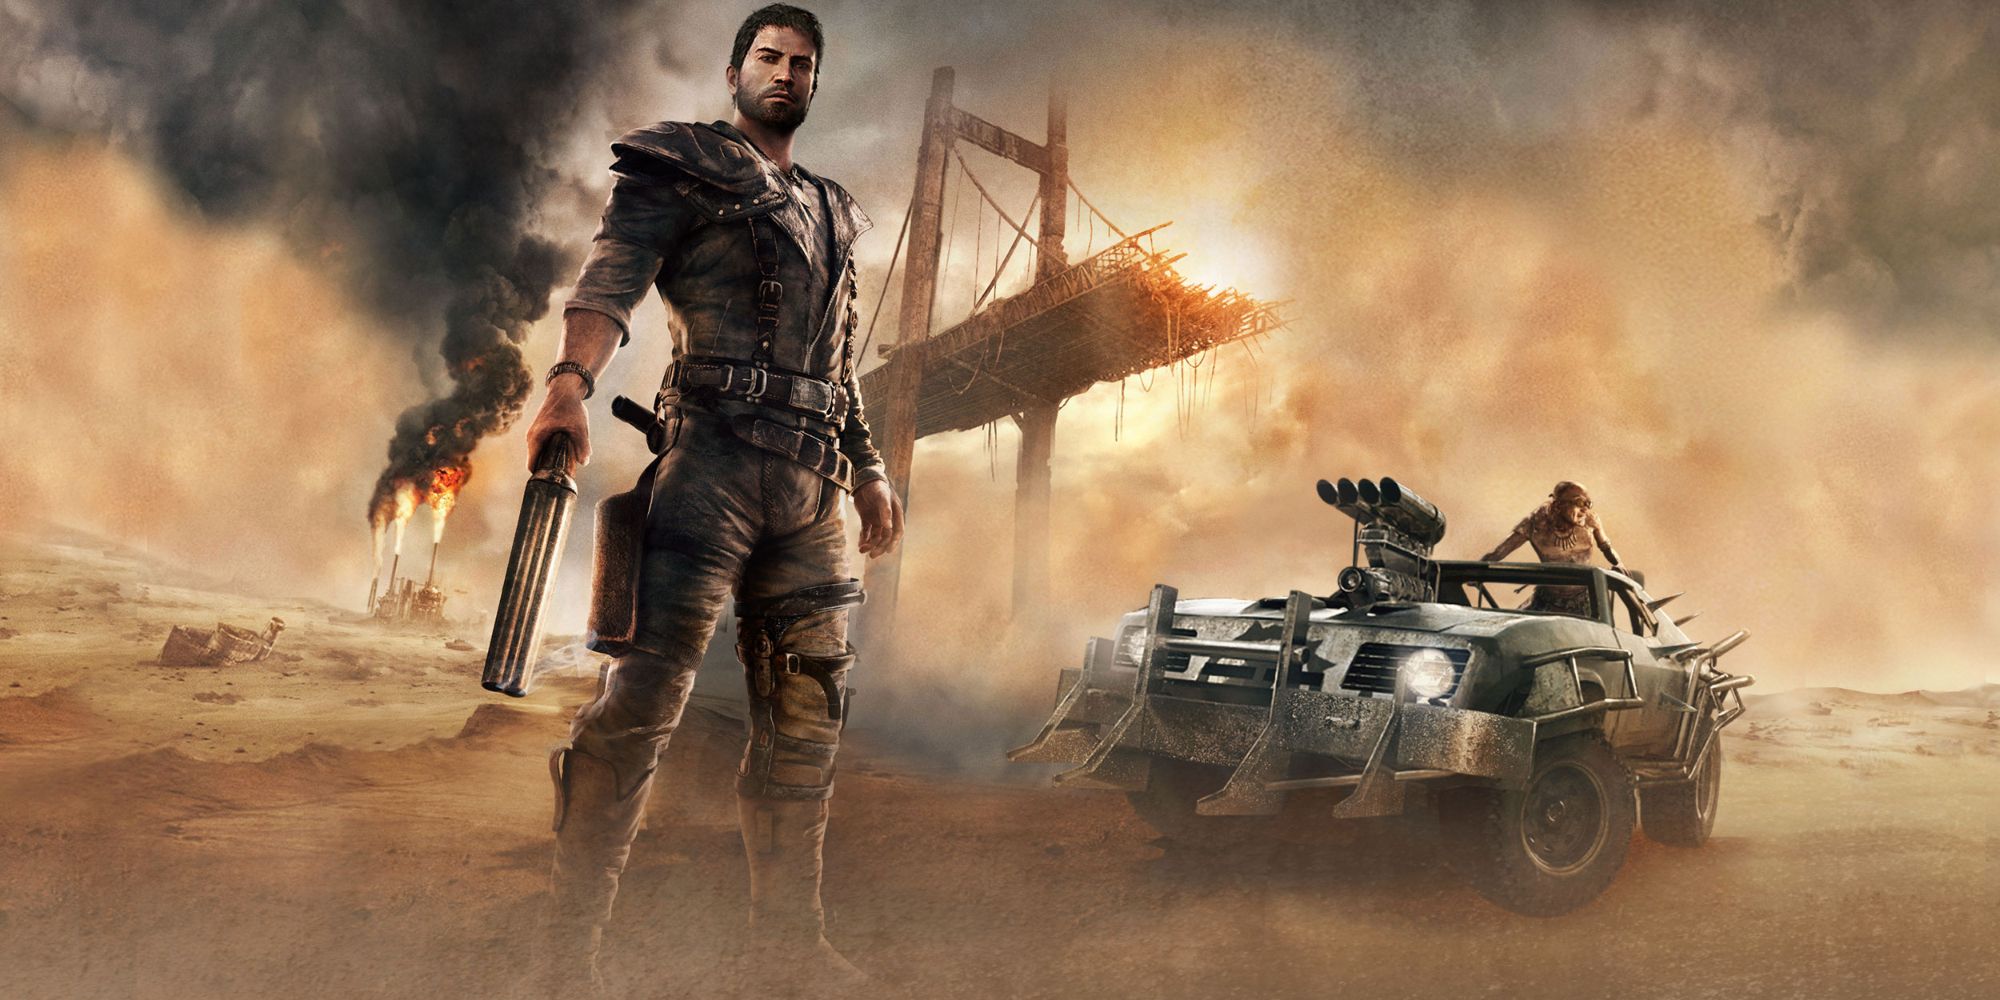 mad-max-the-video-game-poster.jpg